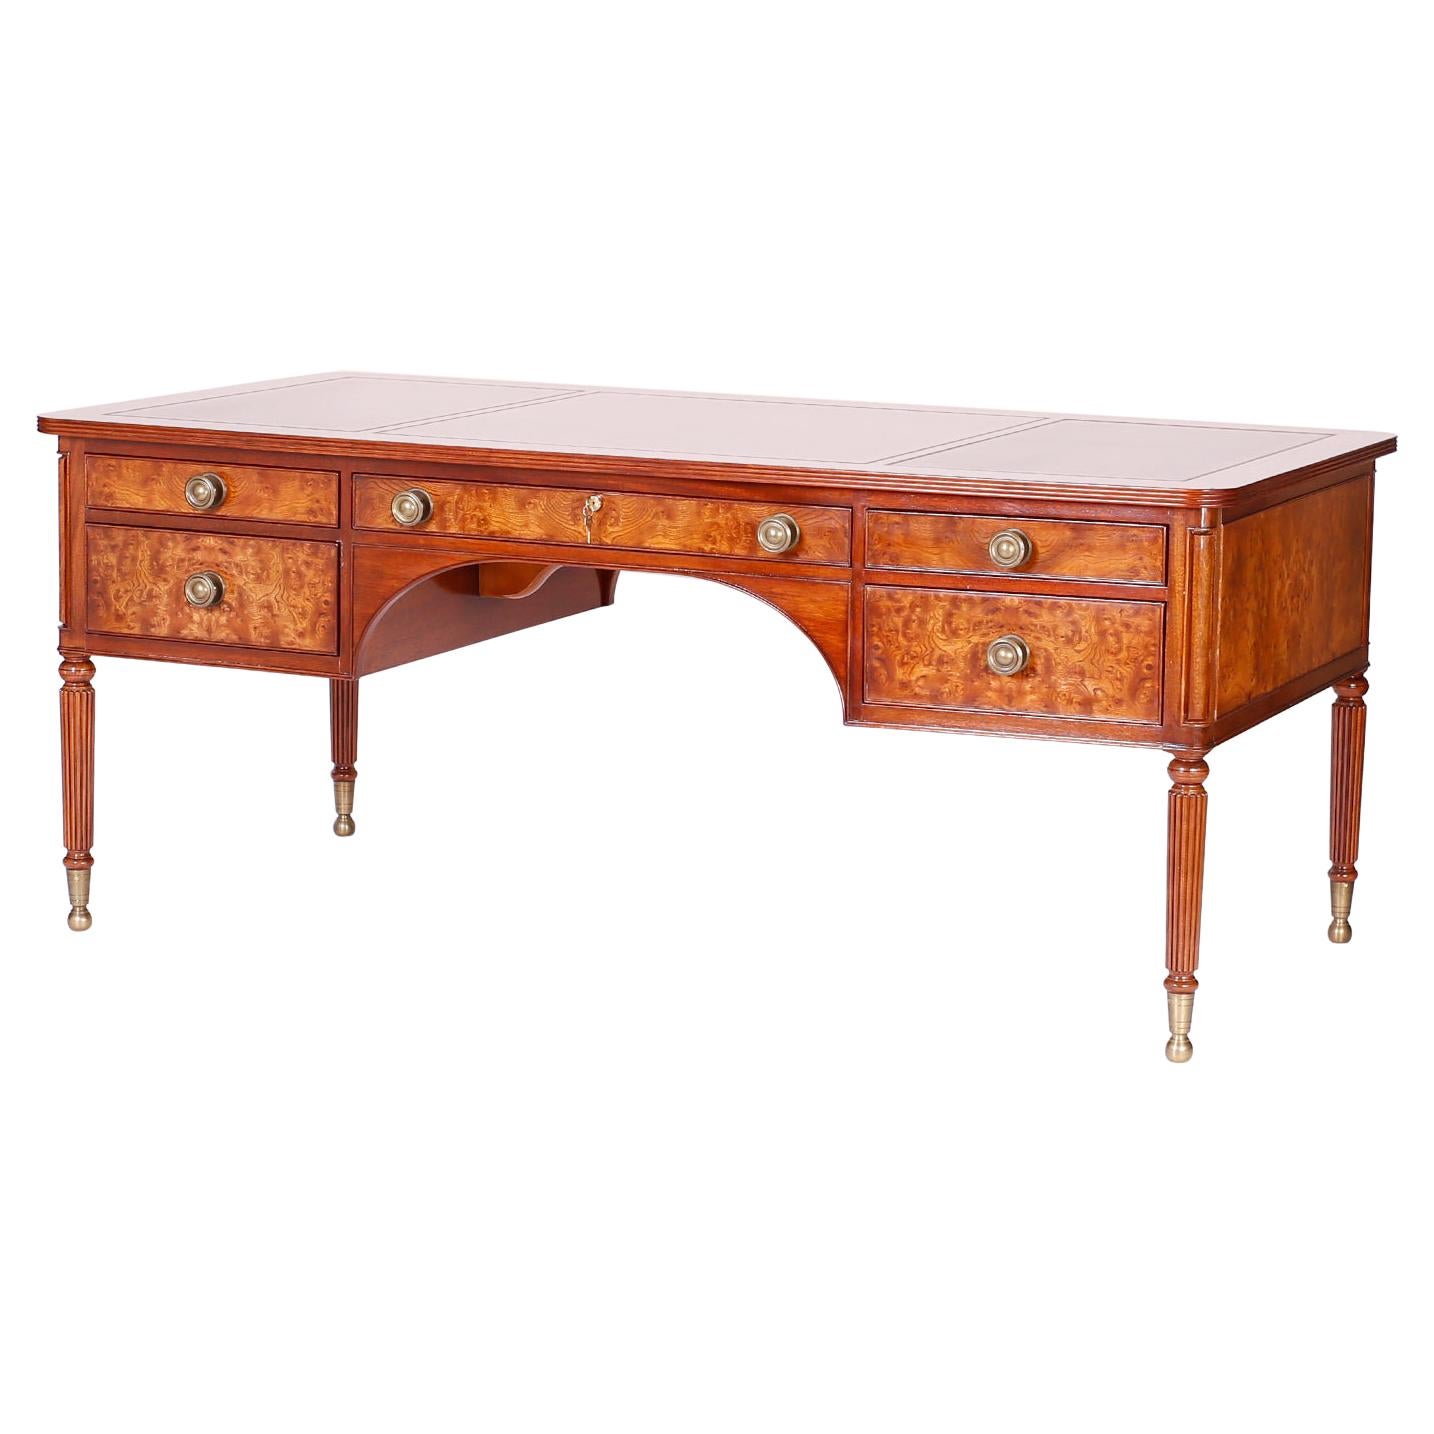 British Colonial Style Leather Top Desk